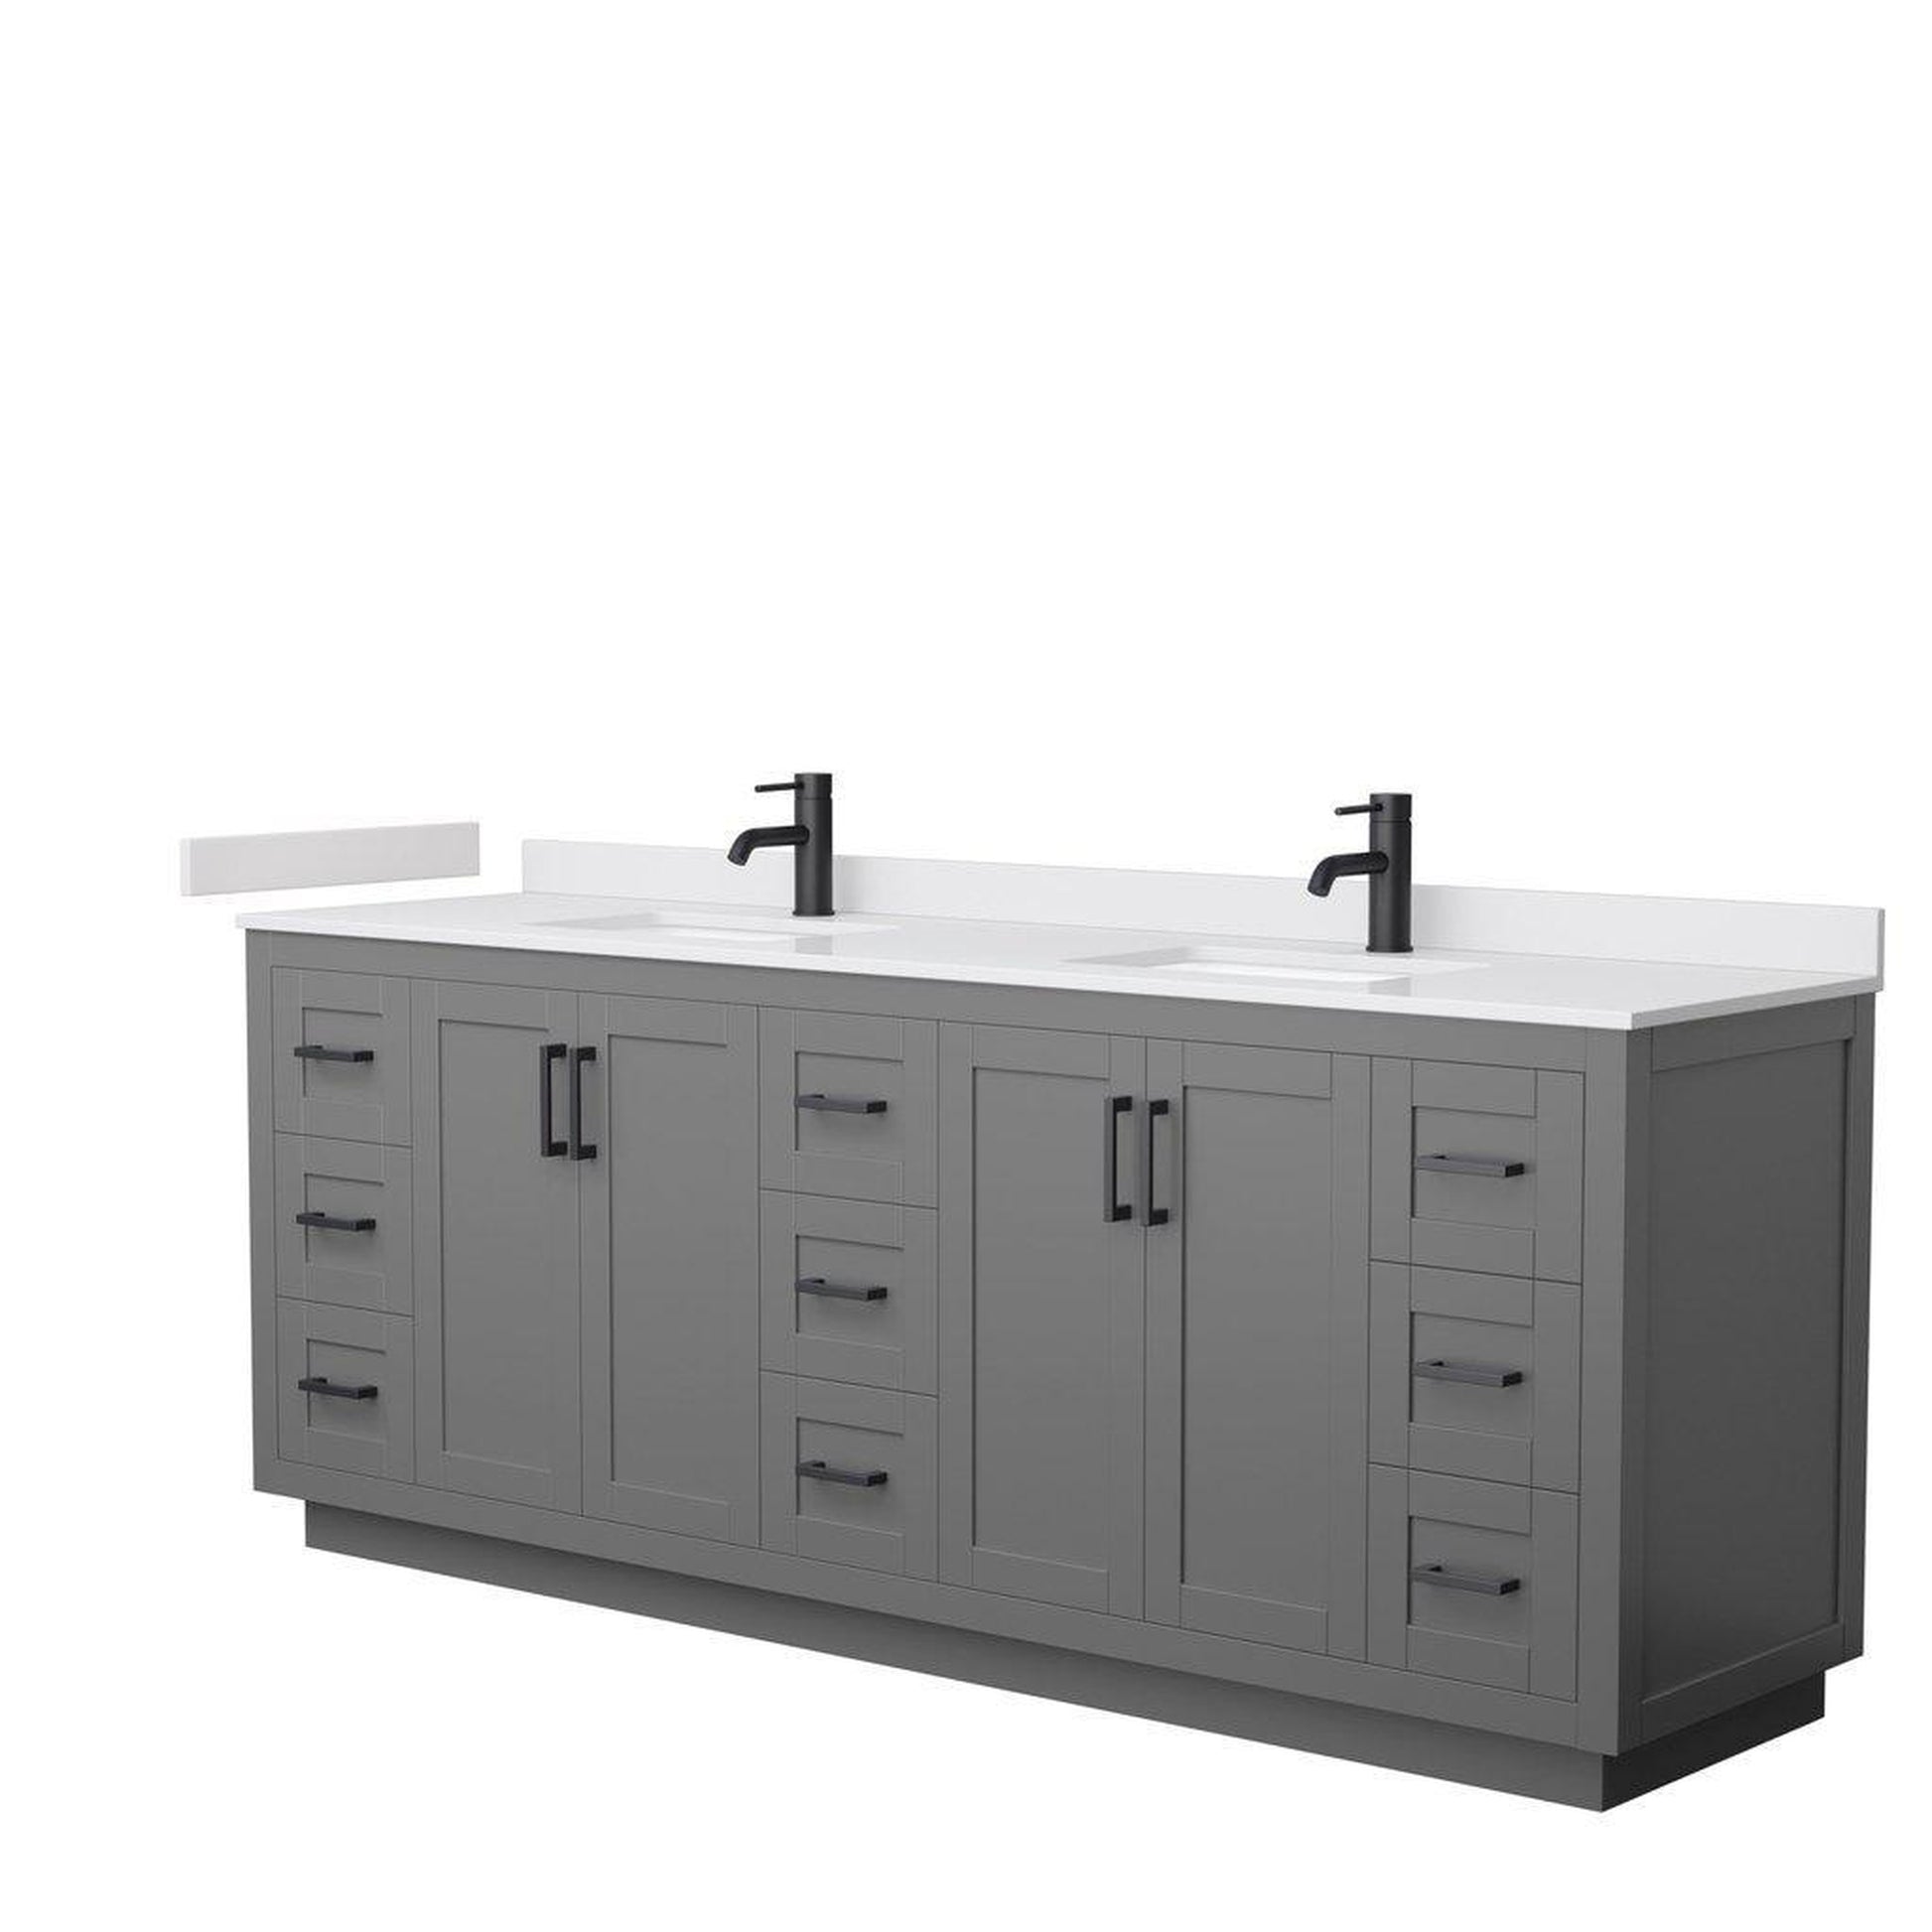 Wyndham Collection Miranda 84" Double Bathroom Dark Gray Vanity Set With White Cultured Marble Countertop, Undermount Square Sink, And Matte Black Trim